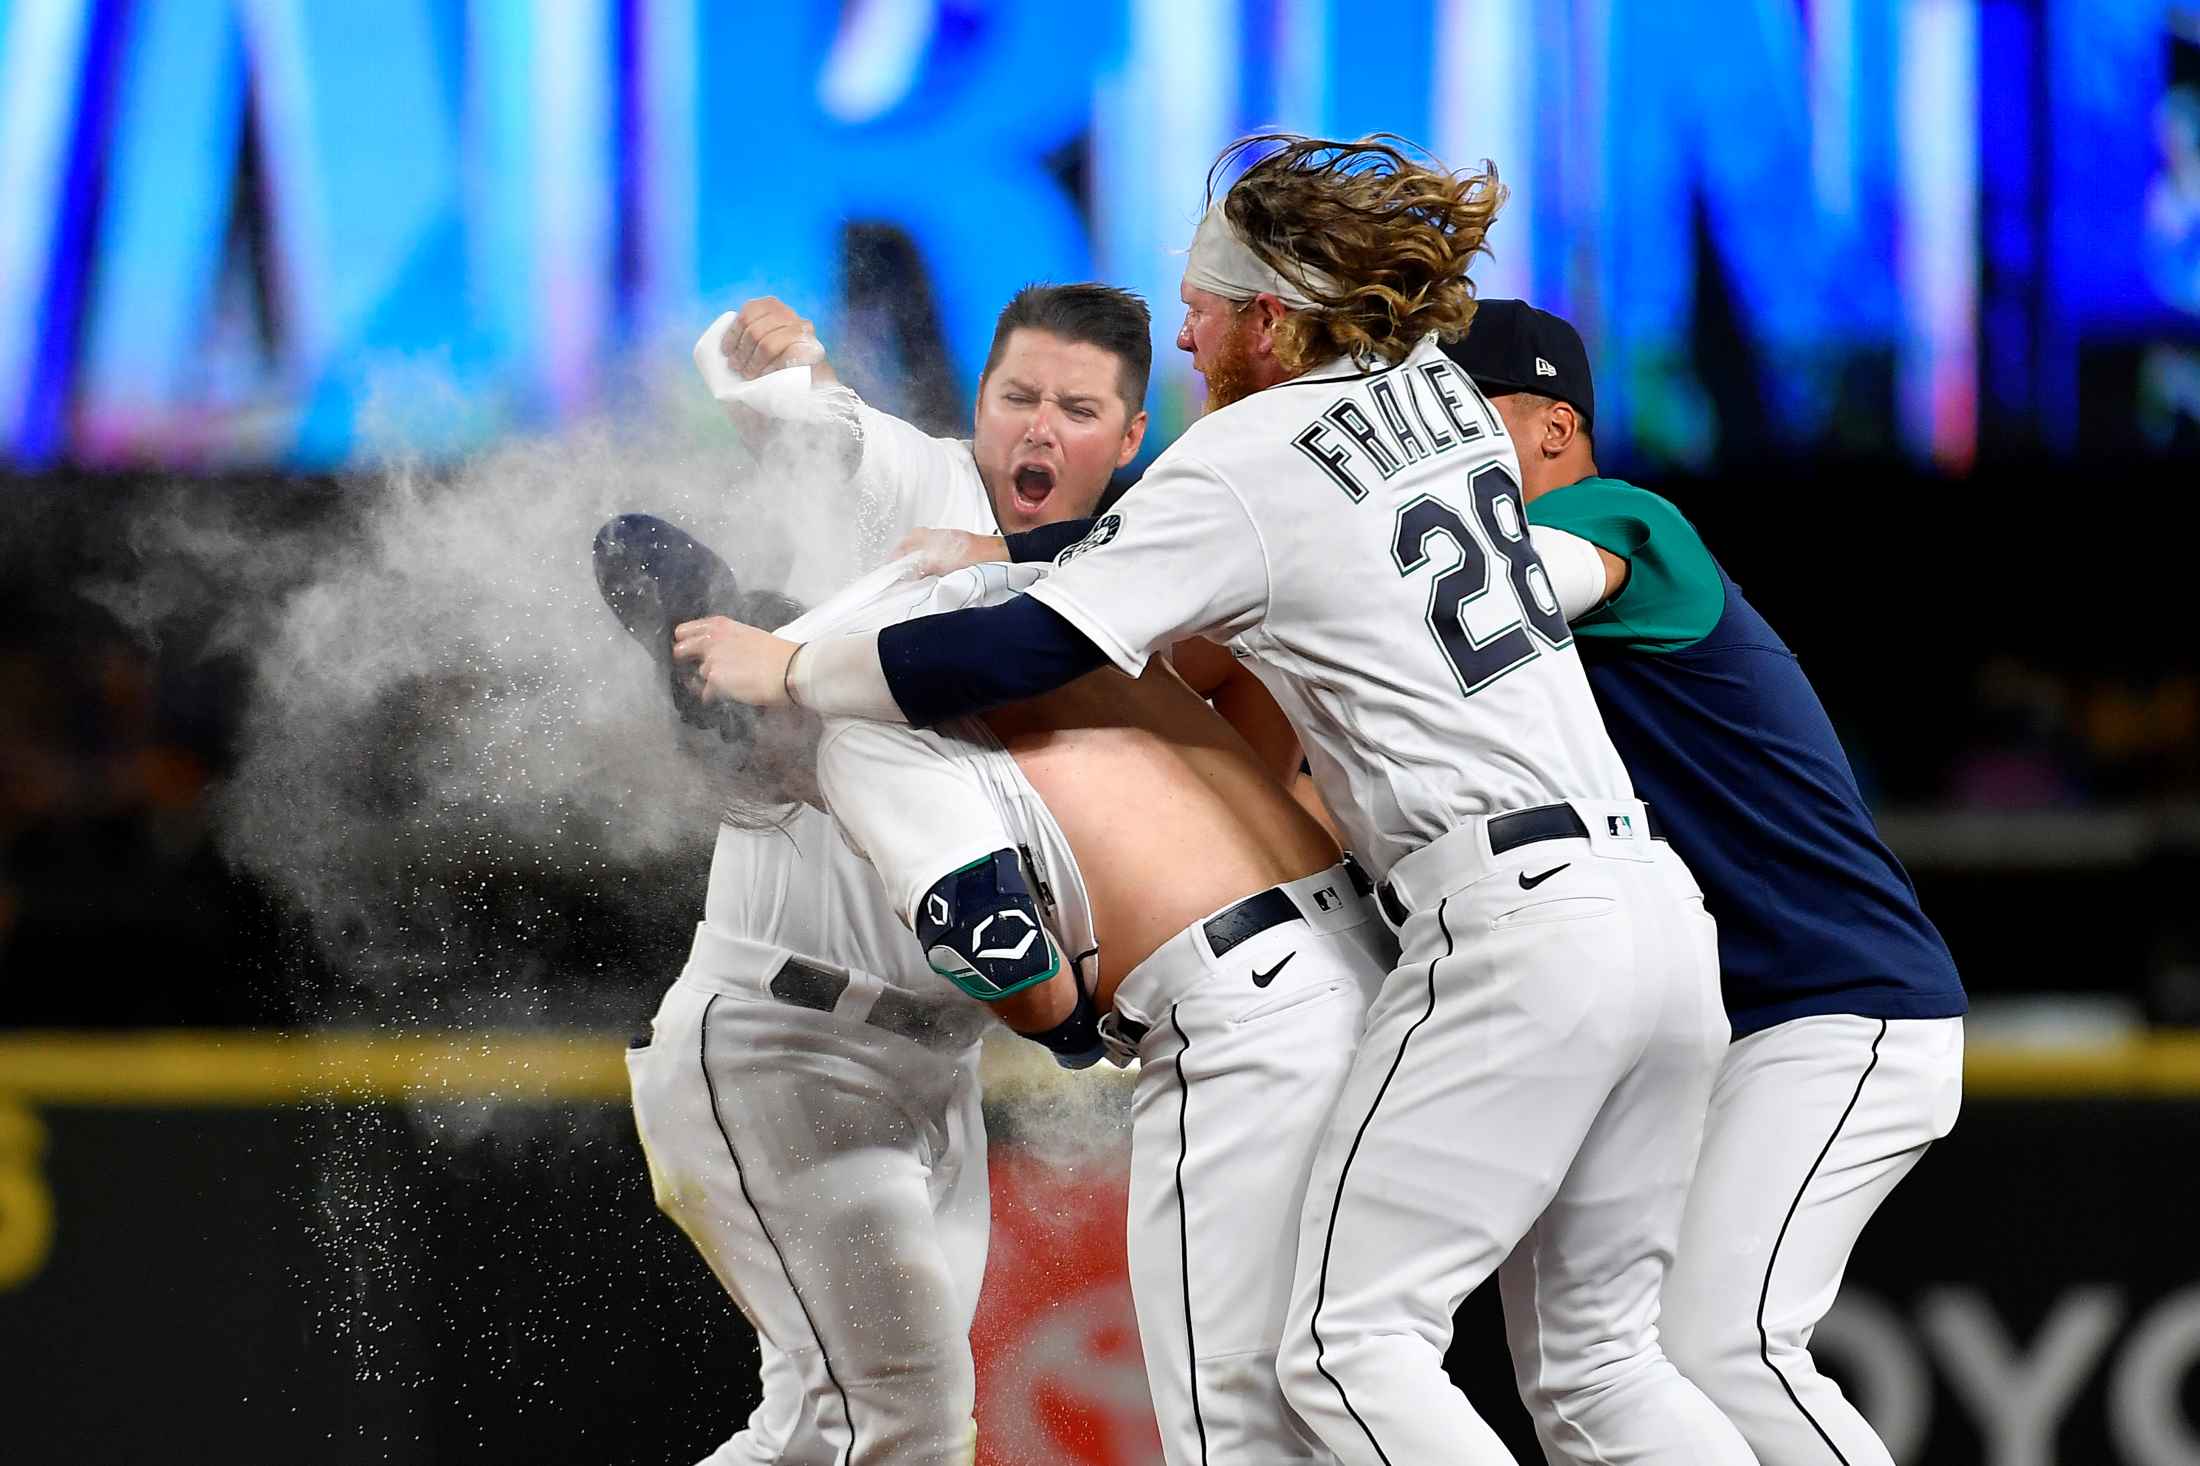 Torrens' 9th-inning Single Sends Mariners Over Rangers 2-1 - Bloomberg